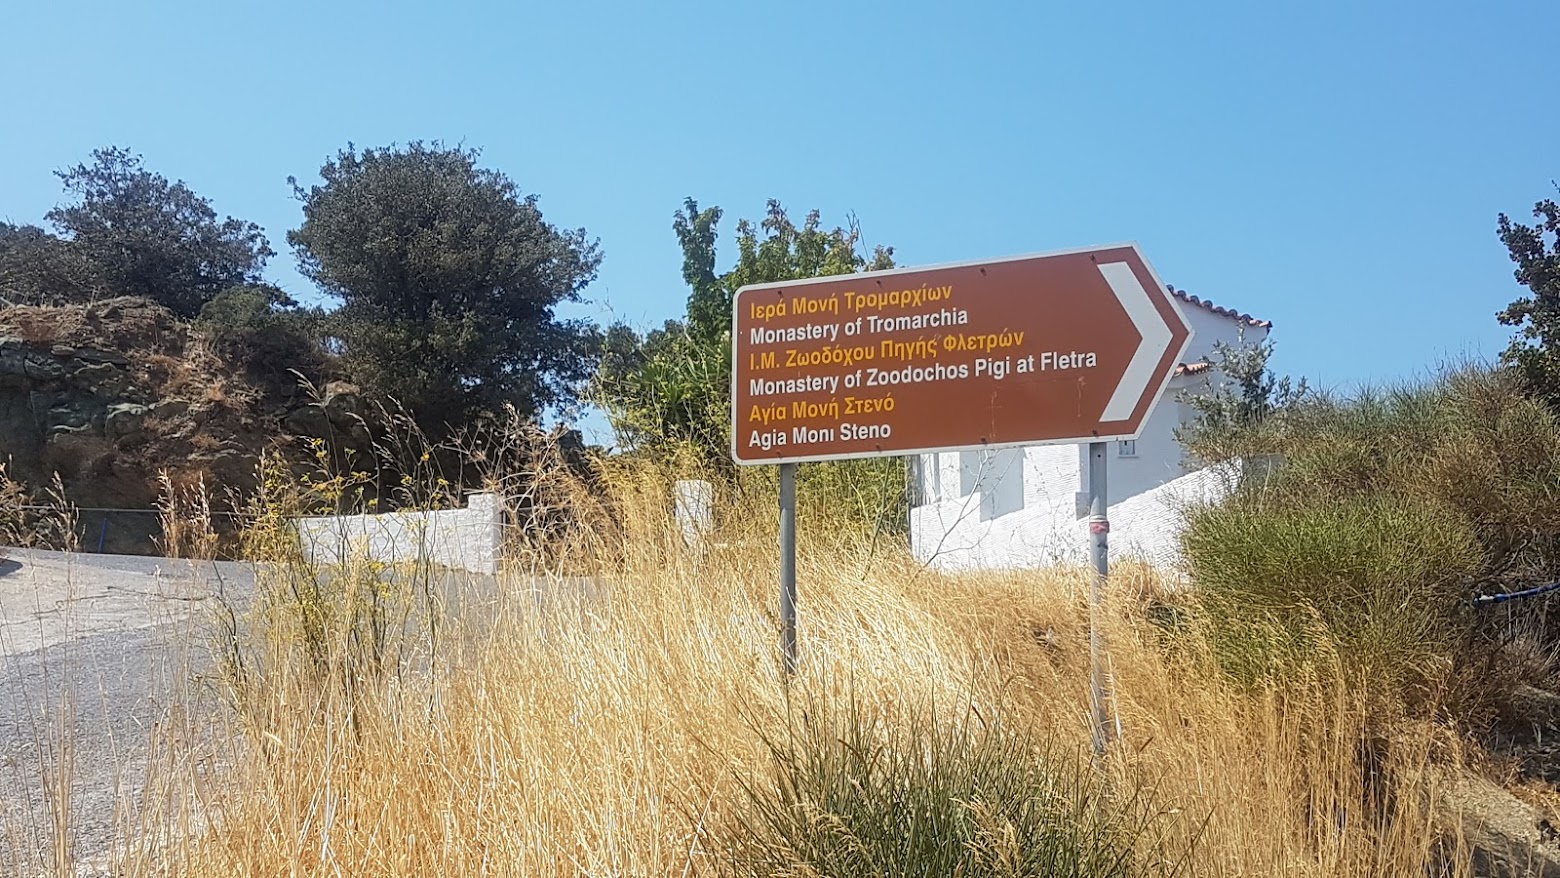 Road sign in Greece in both English and Greek